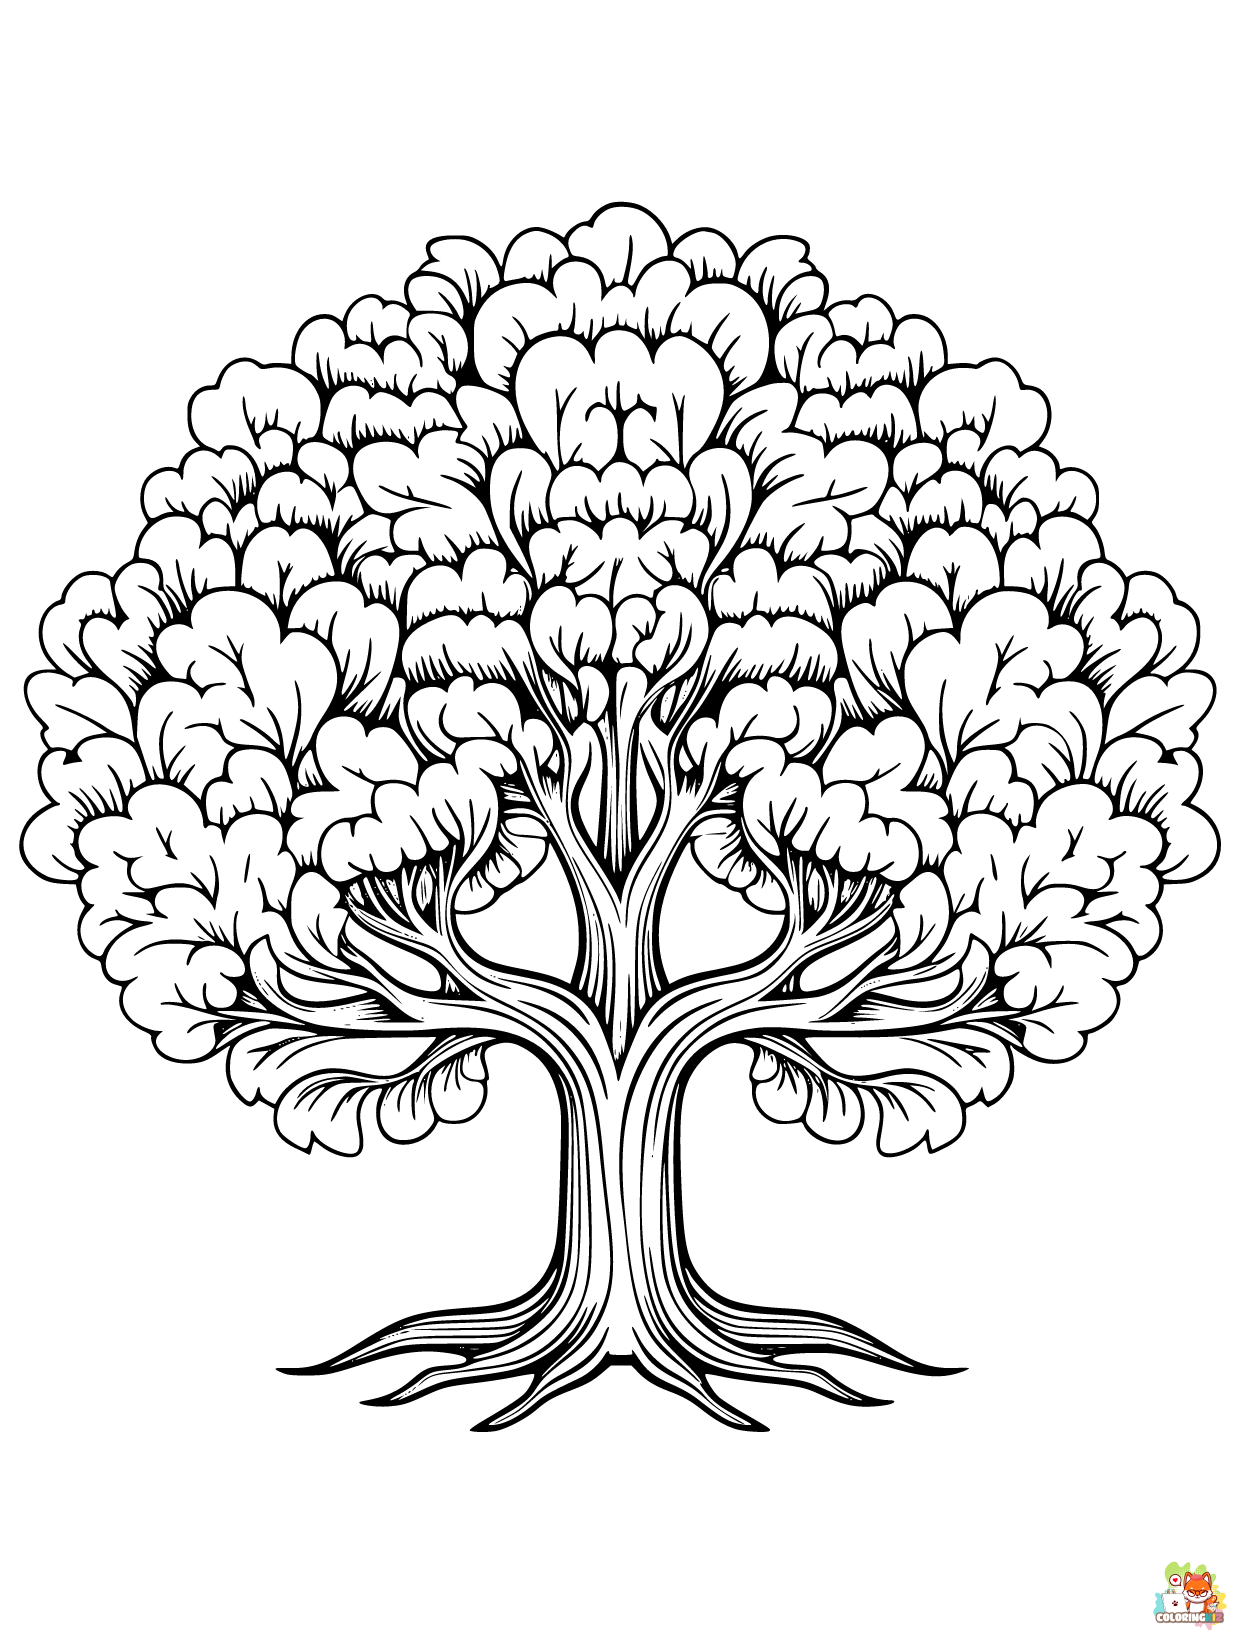 Tree coloring pages 1